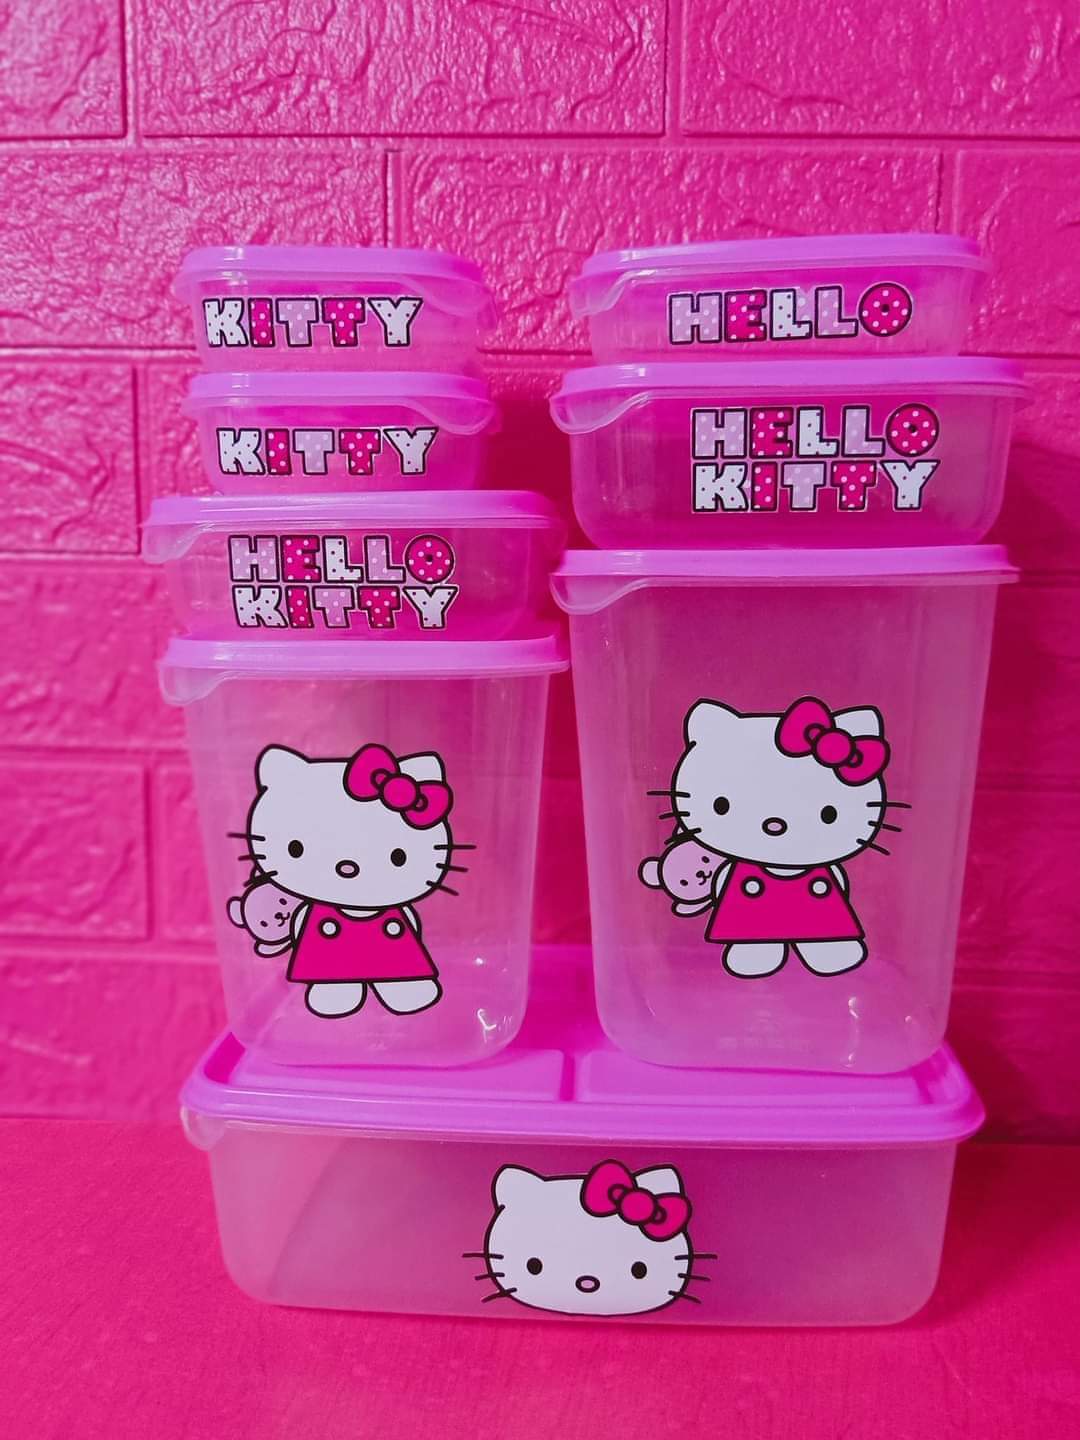 Tupperware Brands Philippines presents Hello Kitty - Mommy Ginger